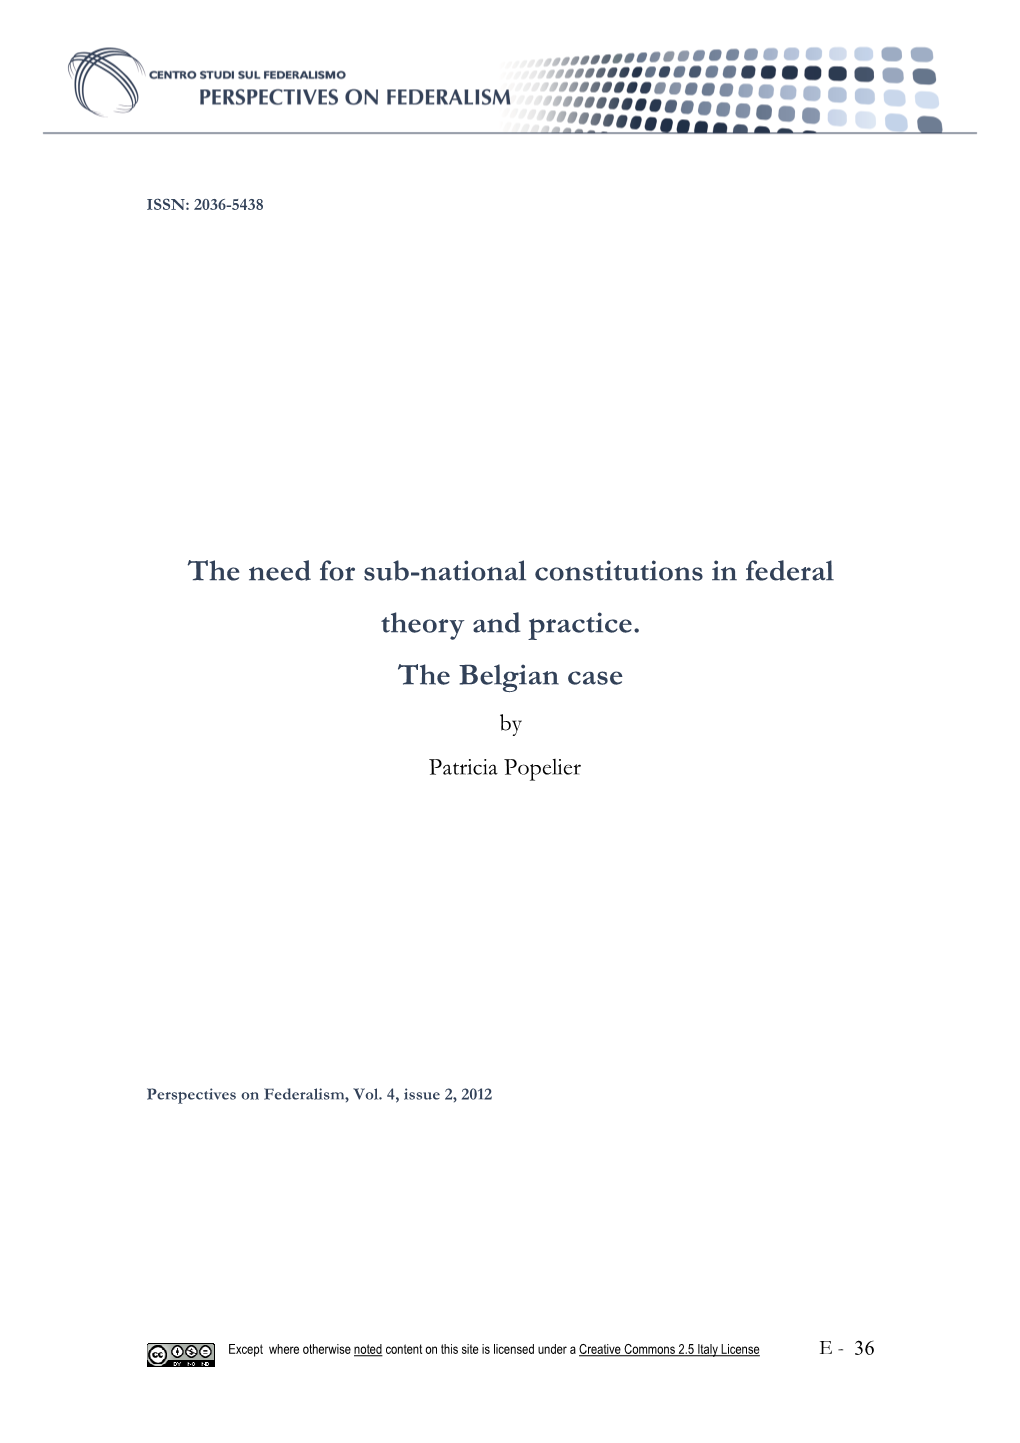 The Need for Sub-National Constitutions in Federal Theory and Practice